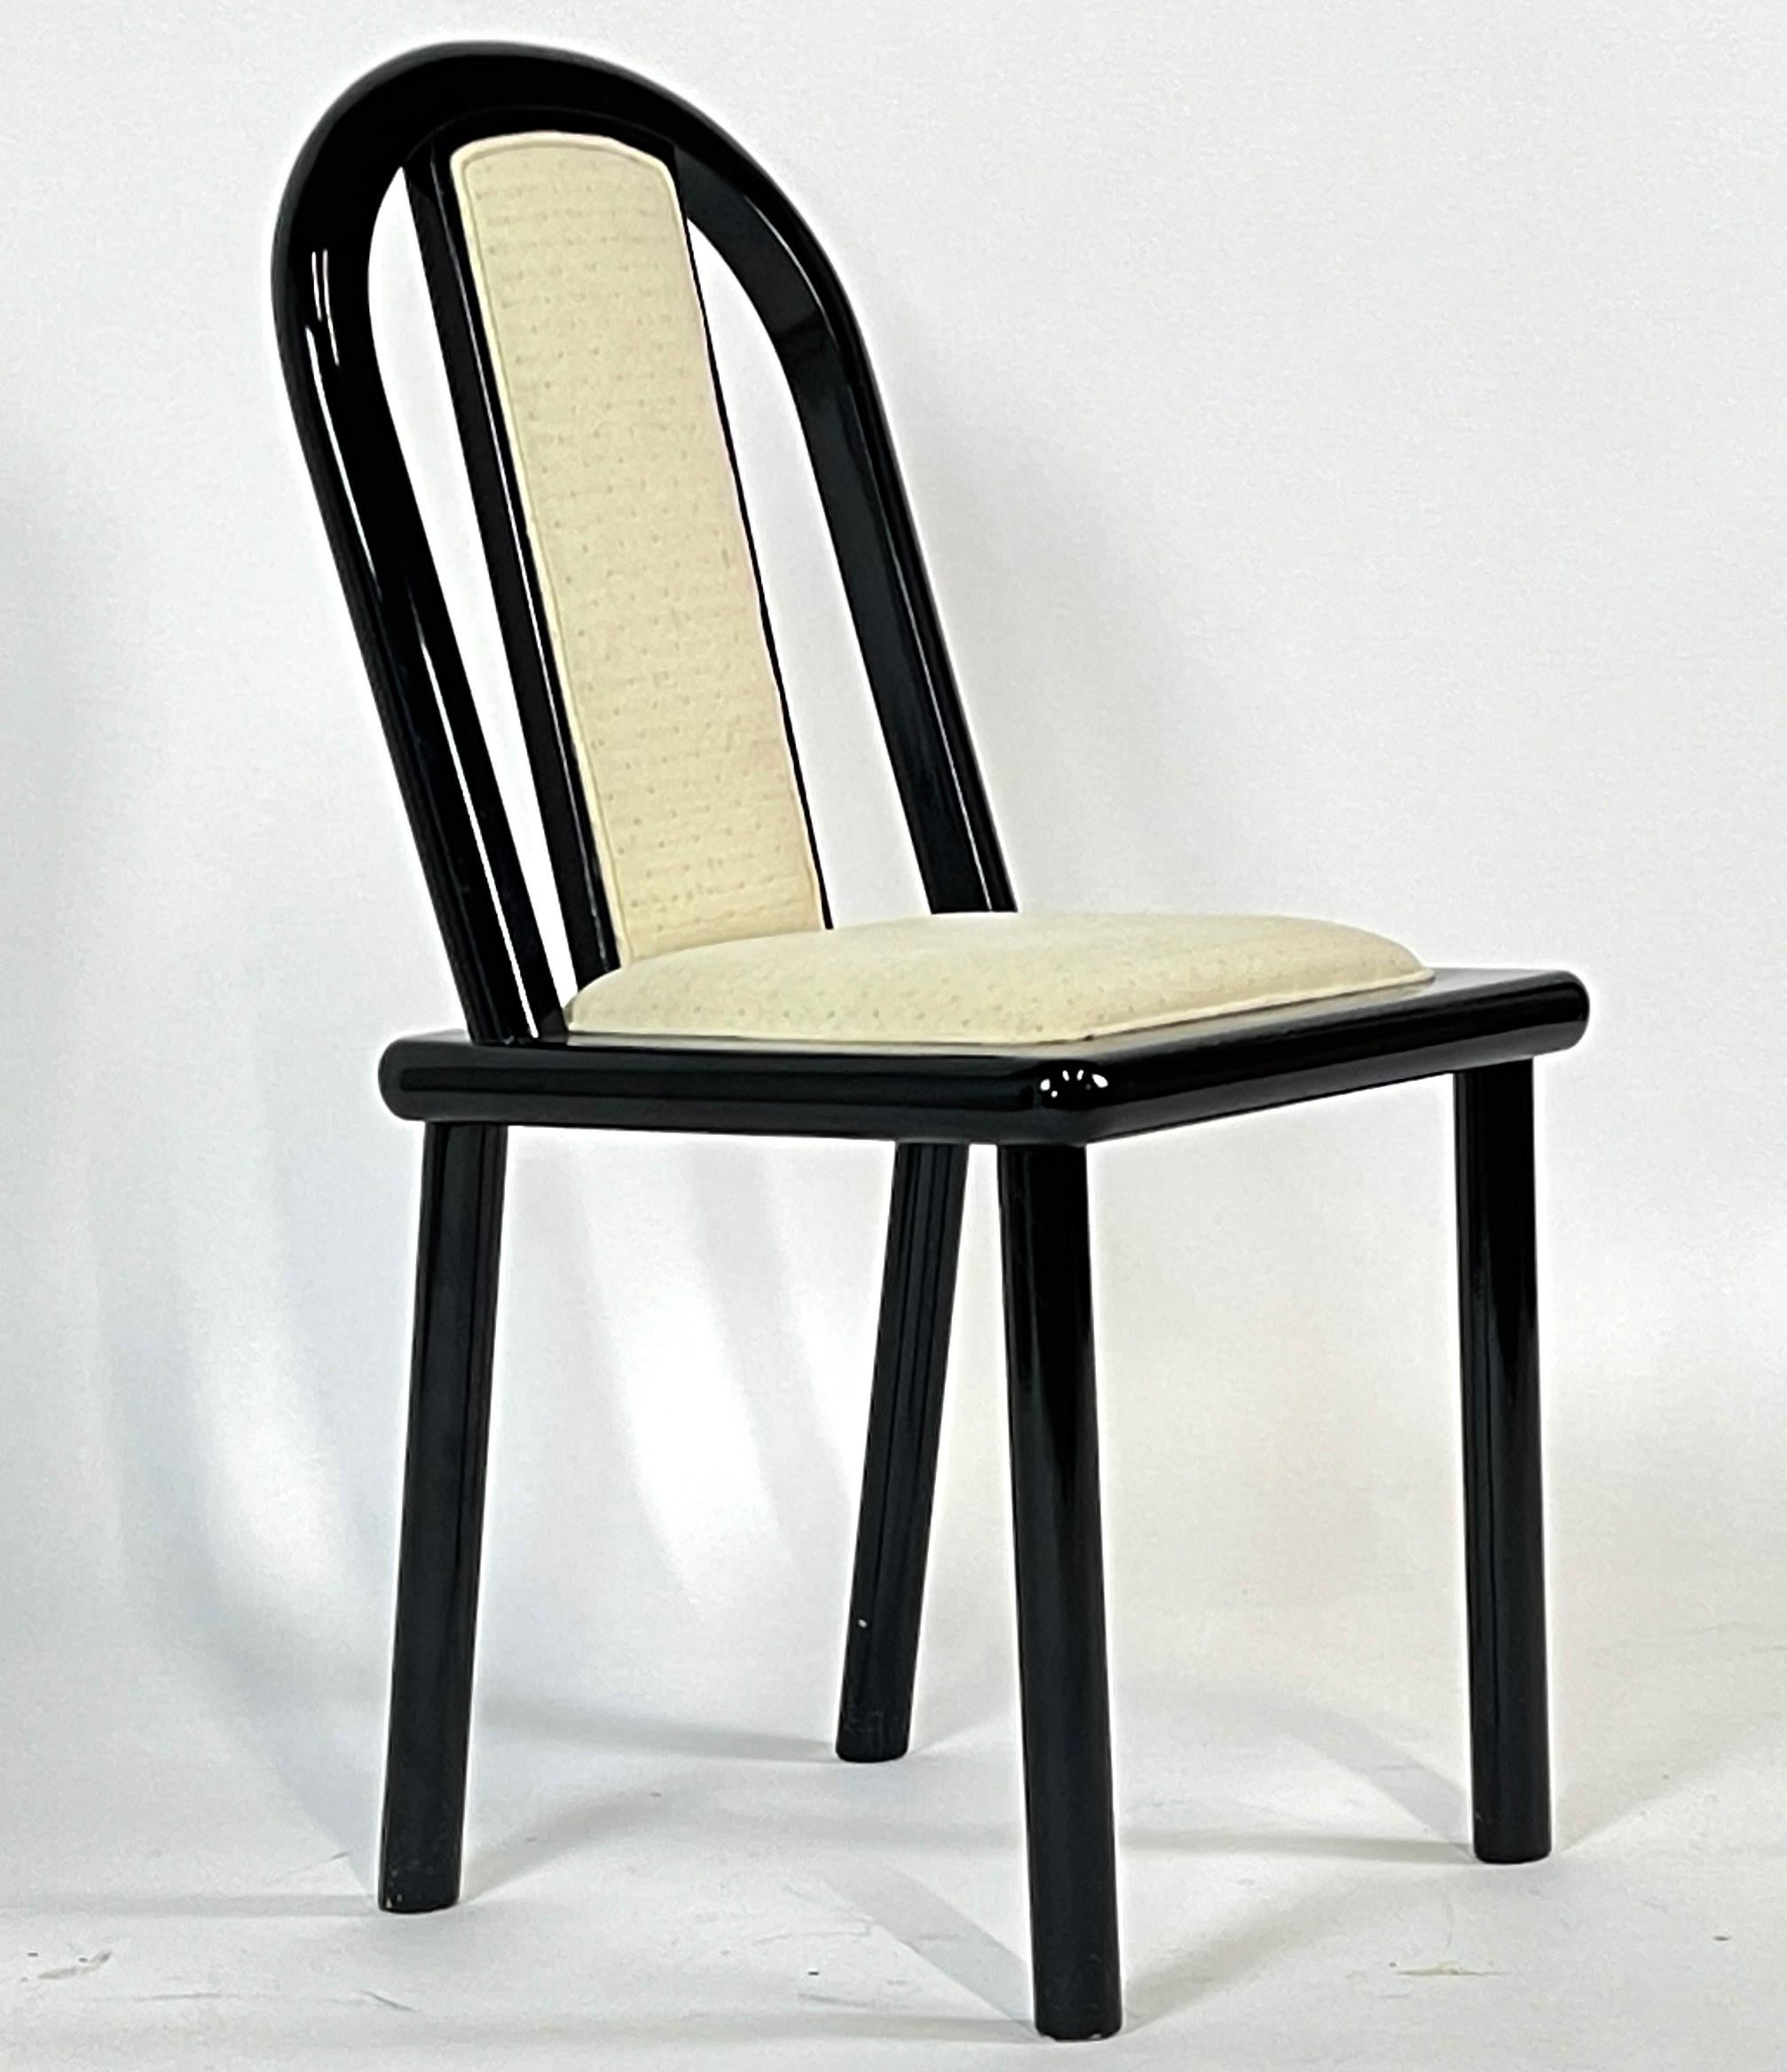 Sturdy set of 4 chairs from the 1980s. Sleek Postmodern style in fabulous black lacquer finish.